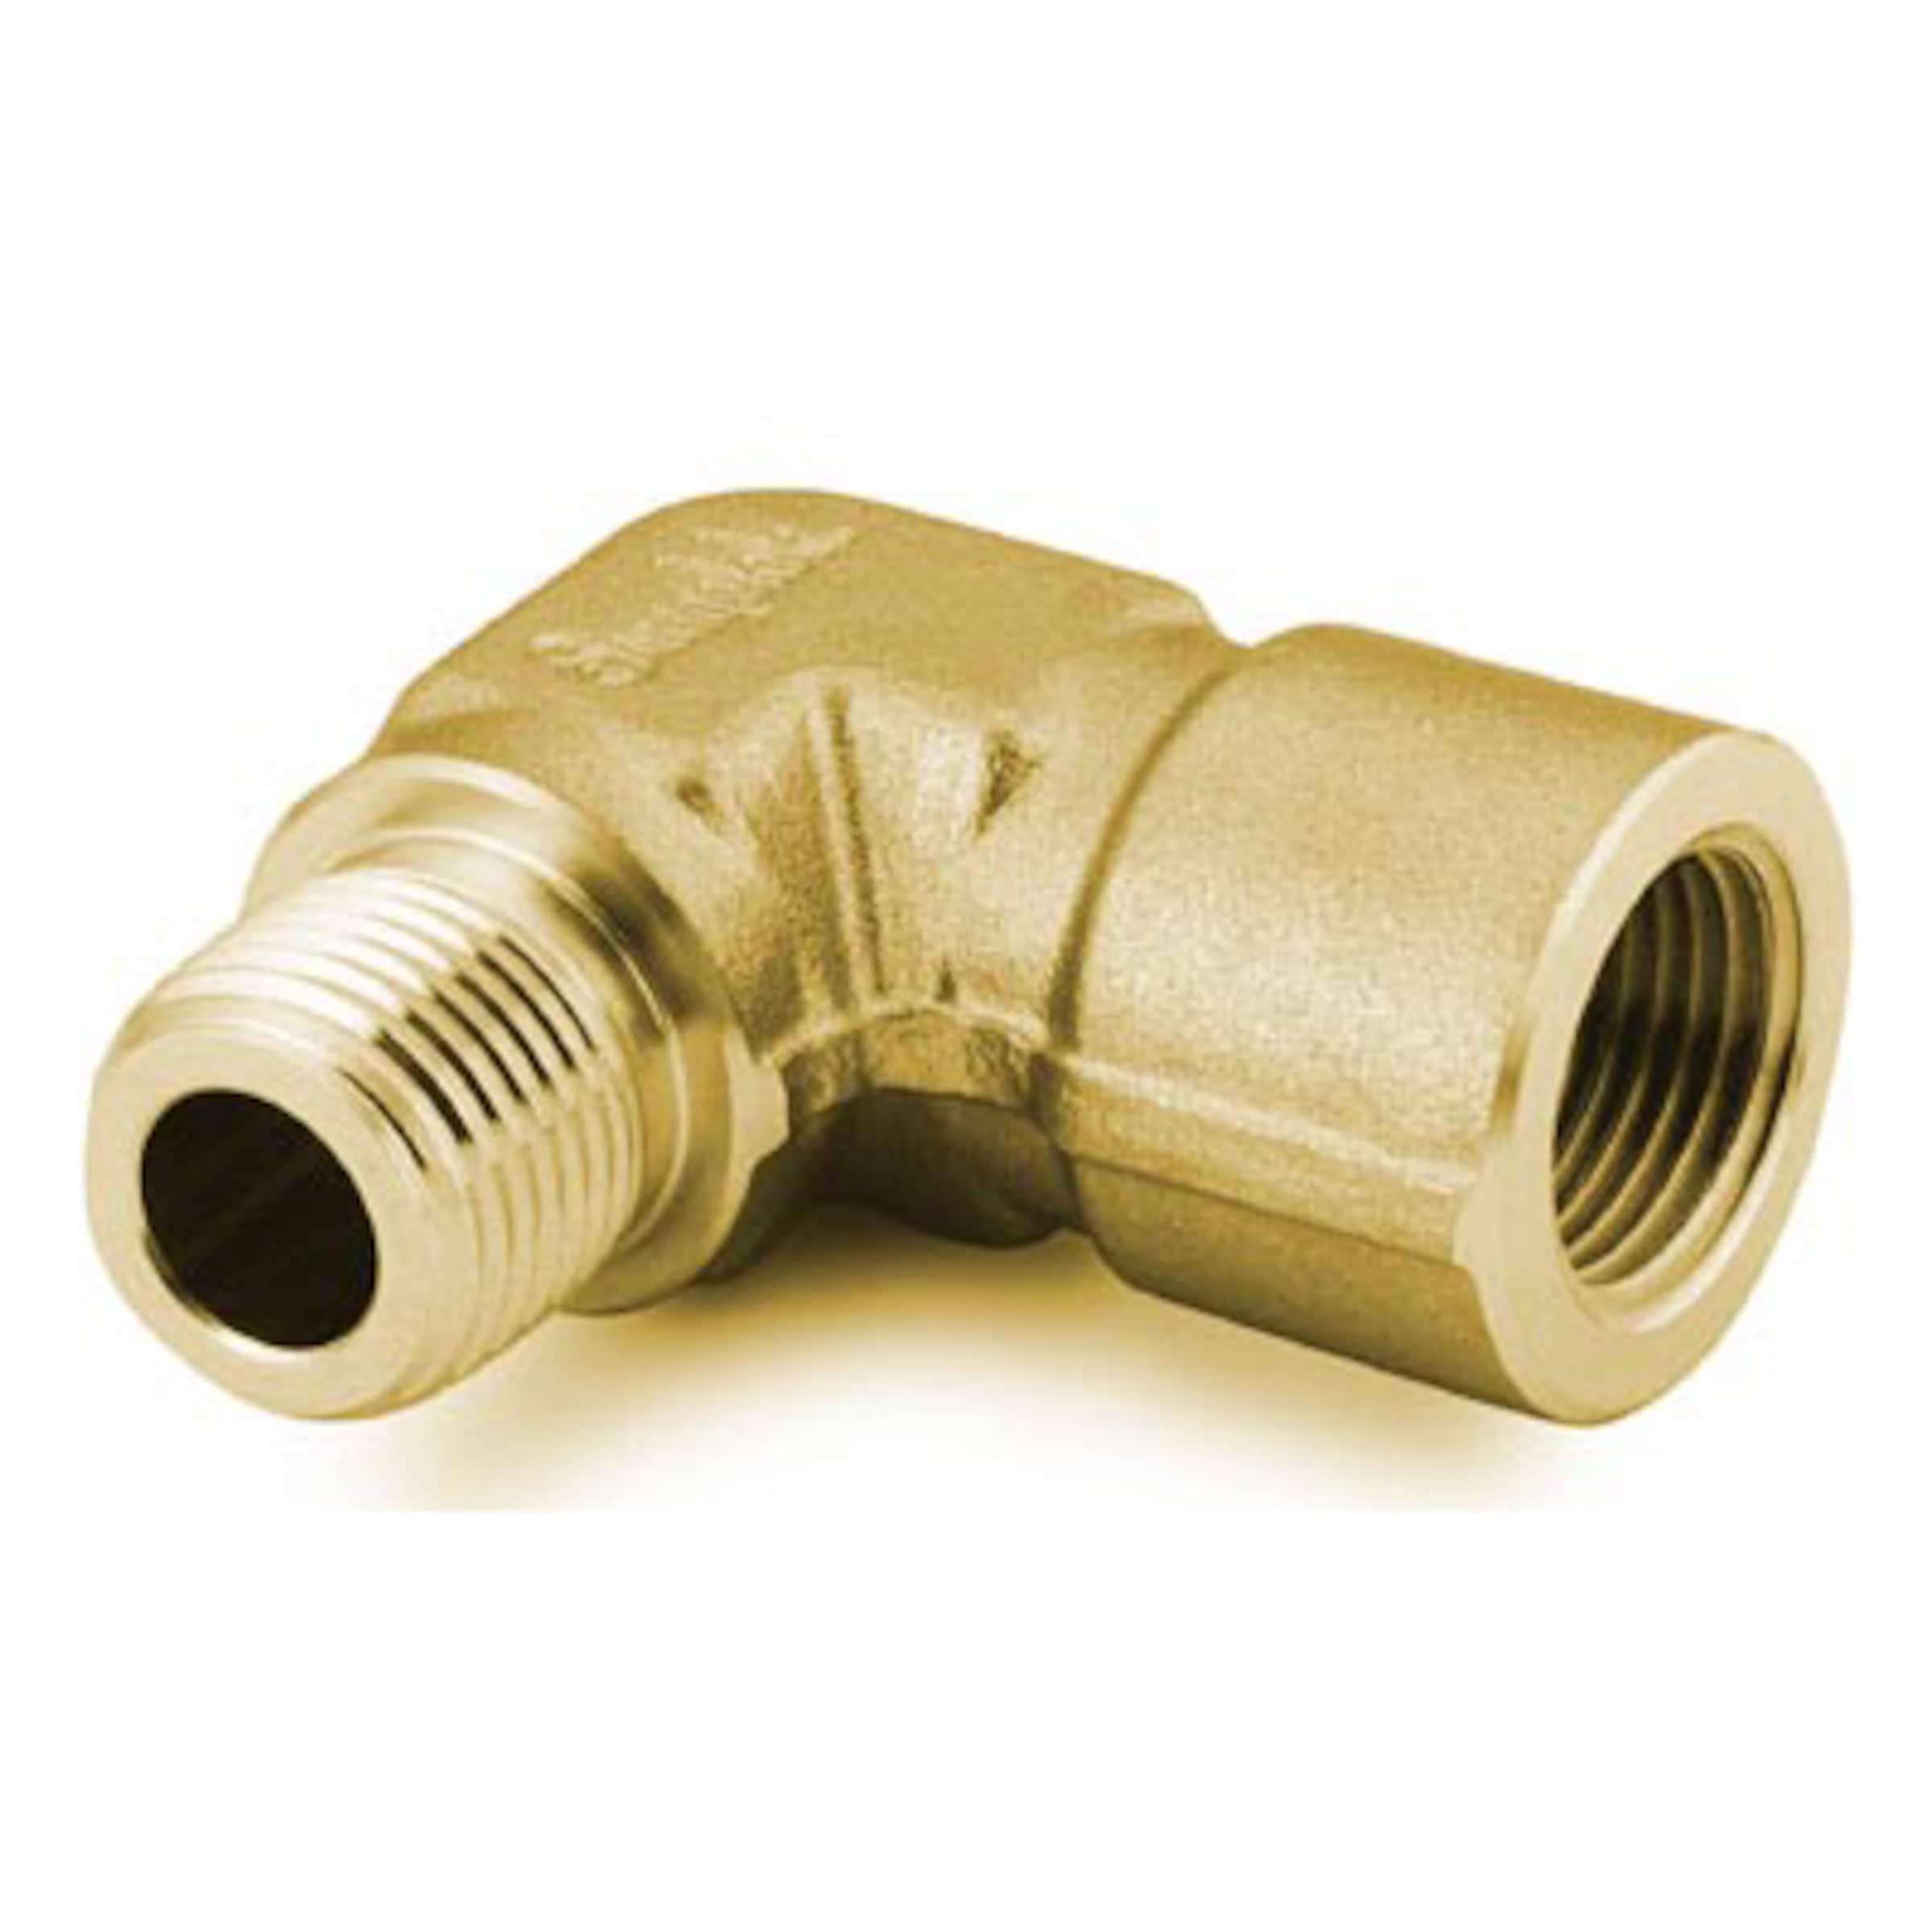 Brass Swagelok Tube Fitting, Female Elbow, 1/2 in. Tube OD x 3/8 in. Female  NPT, Female Connectors, Tube Fittings and Adapters, Fittings, All  Products